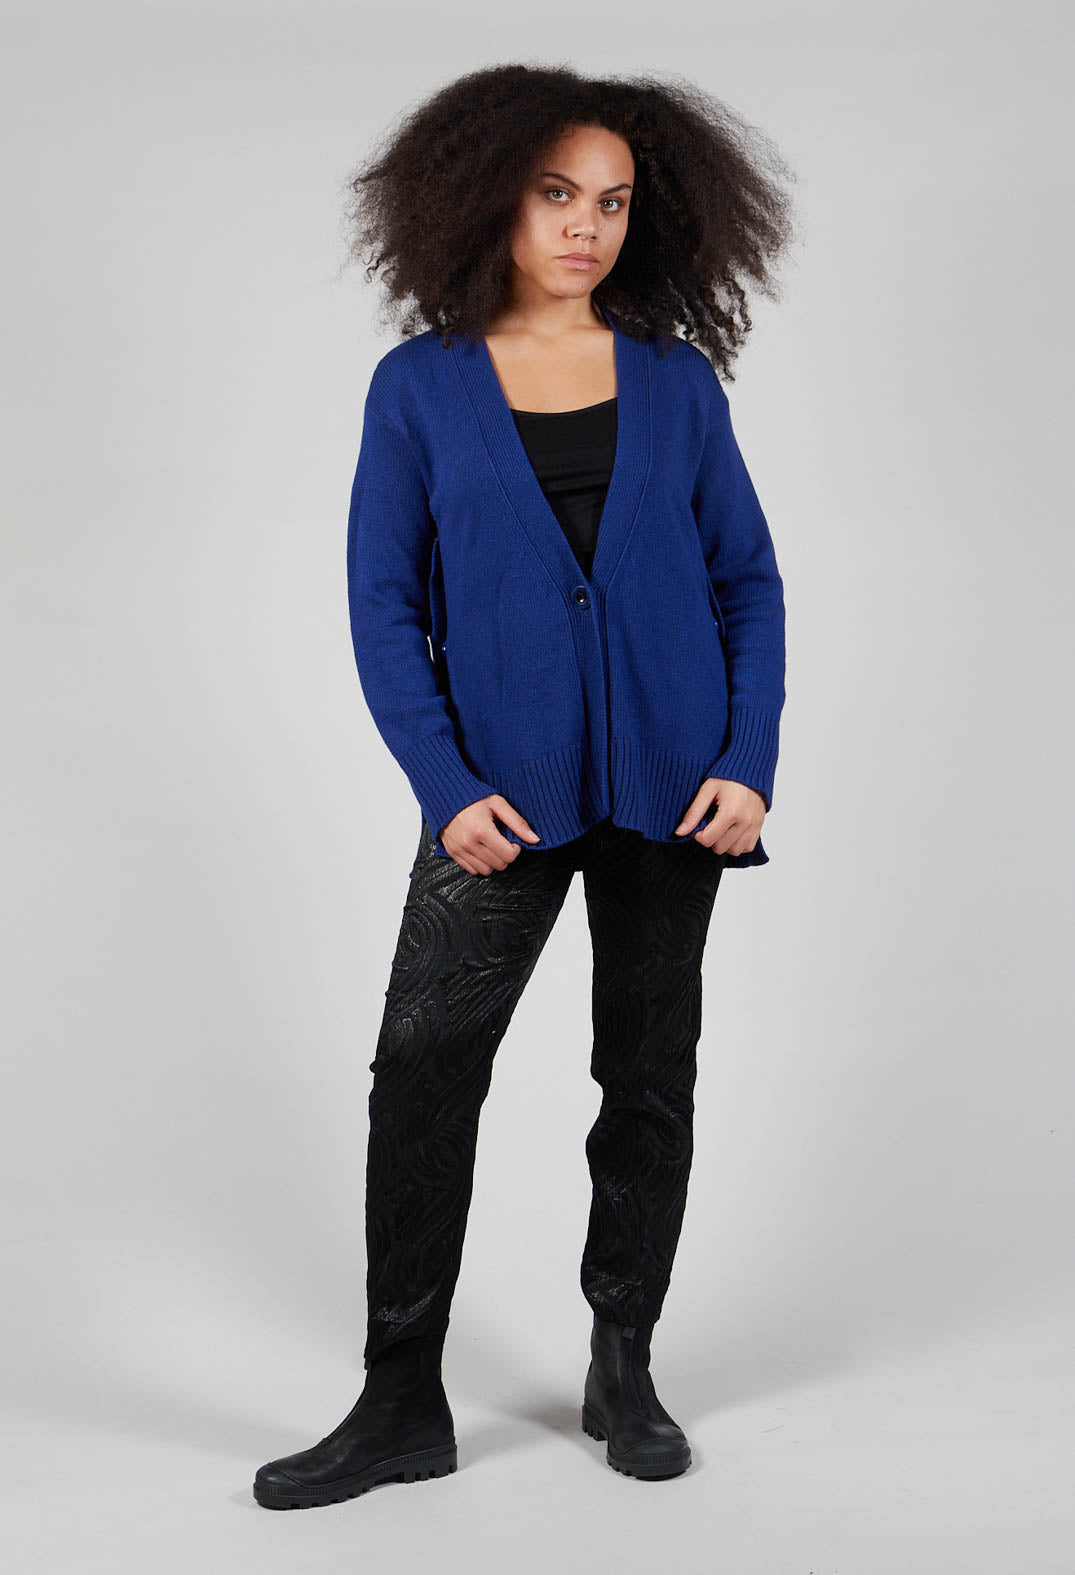 Knitted Cardigan in Cobalto Cobalt